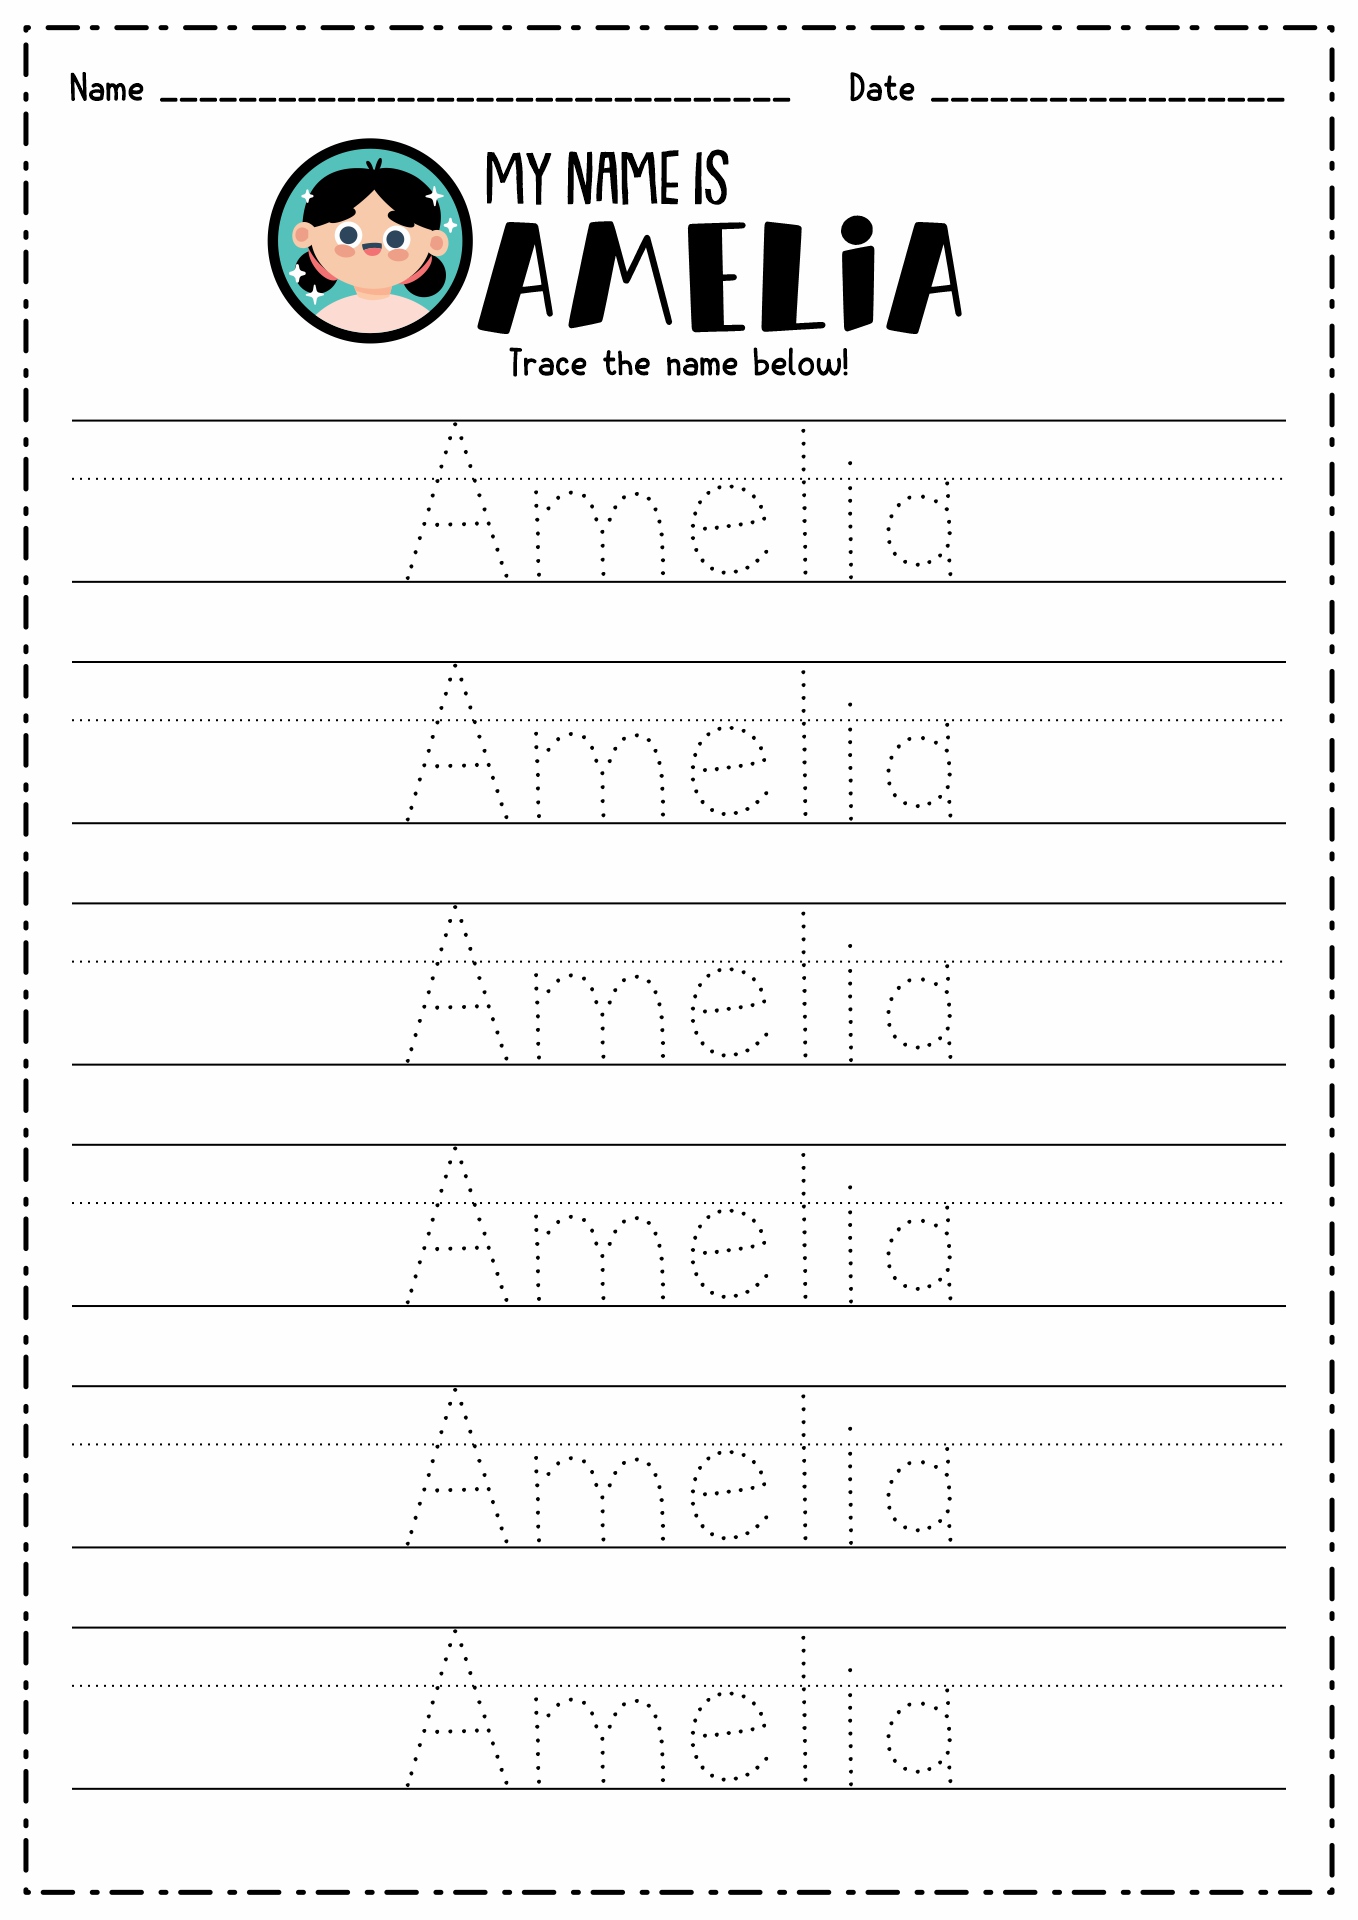 14 Best Images of Create Name Tracing Worksheets - Create ...